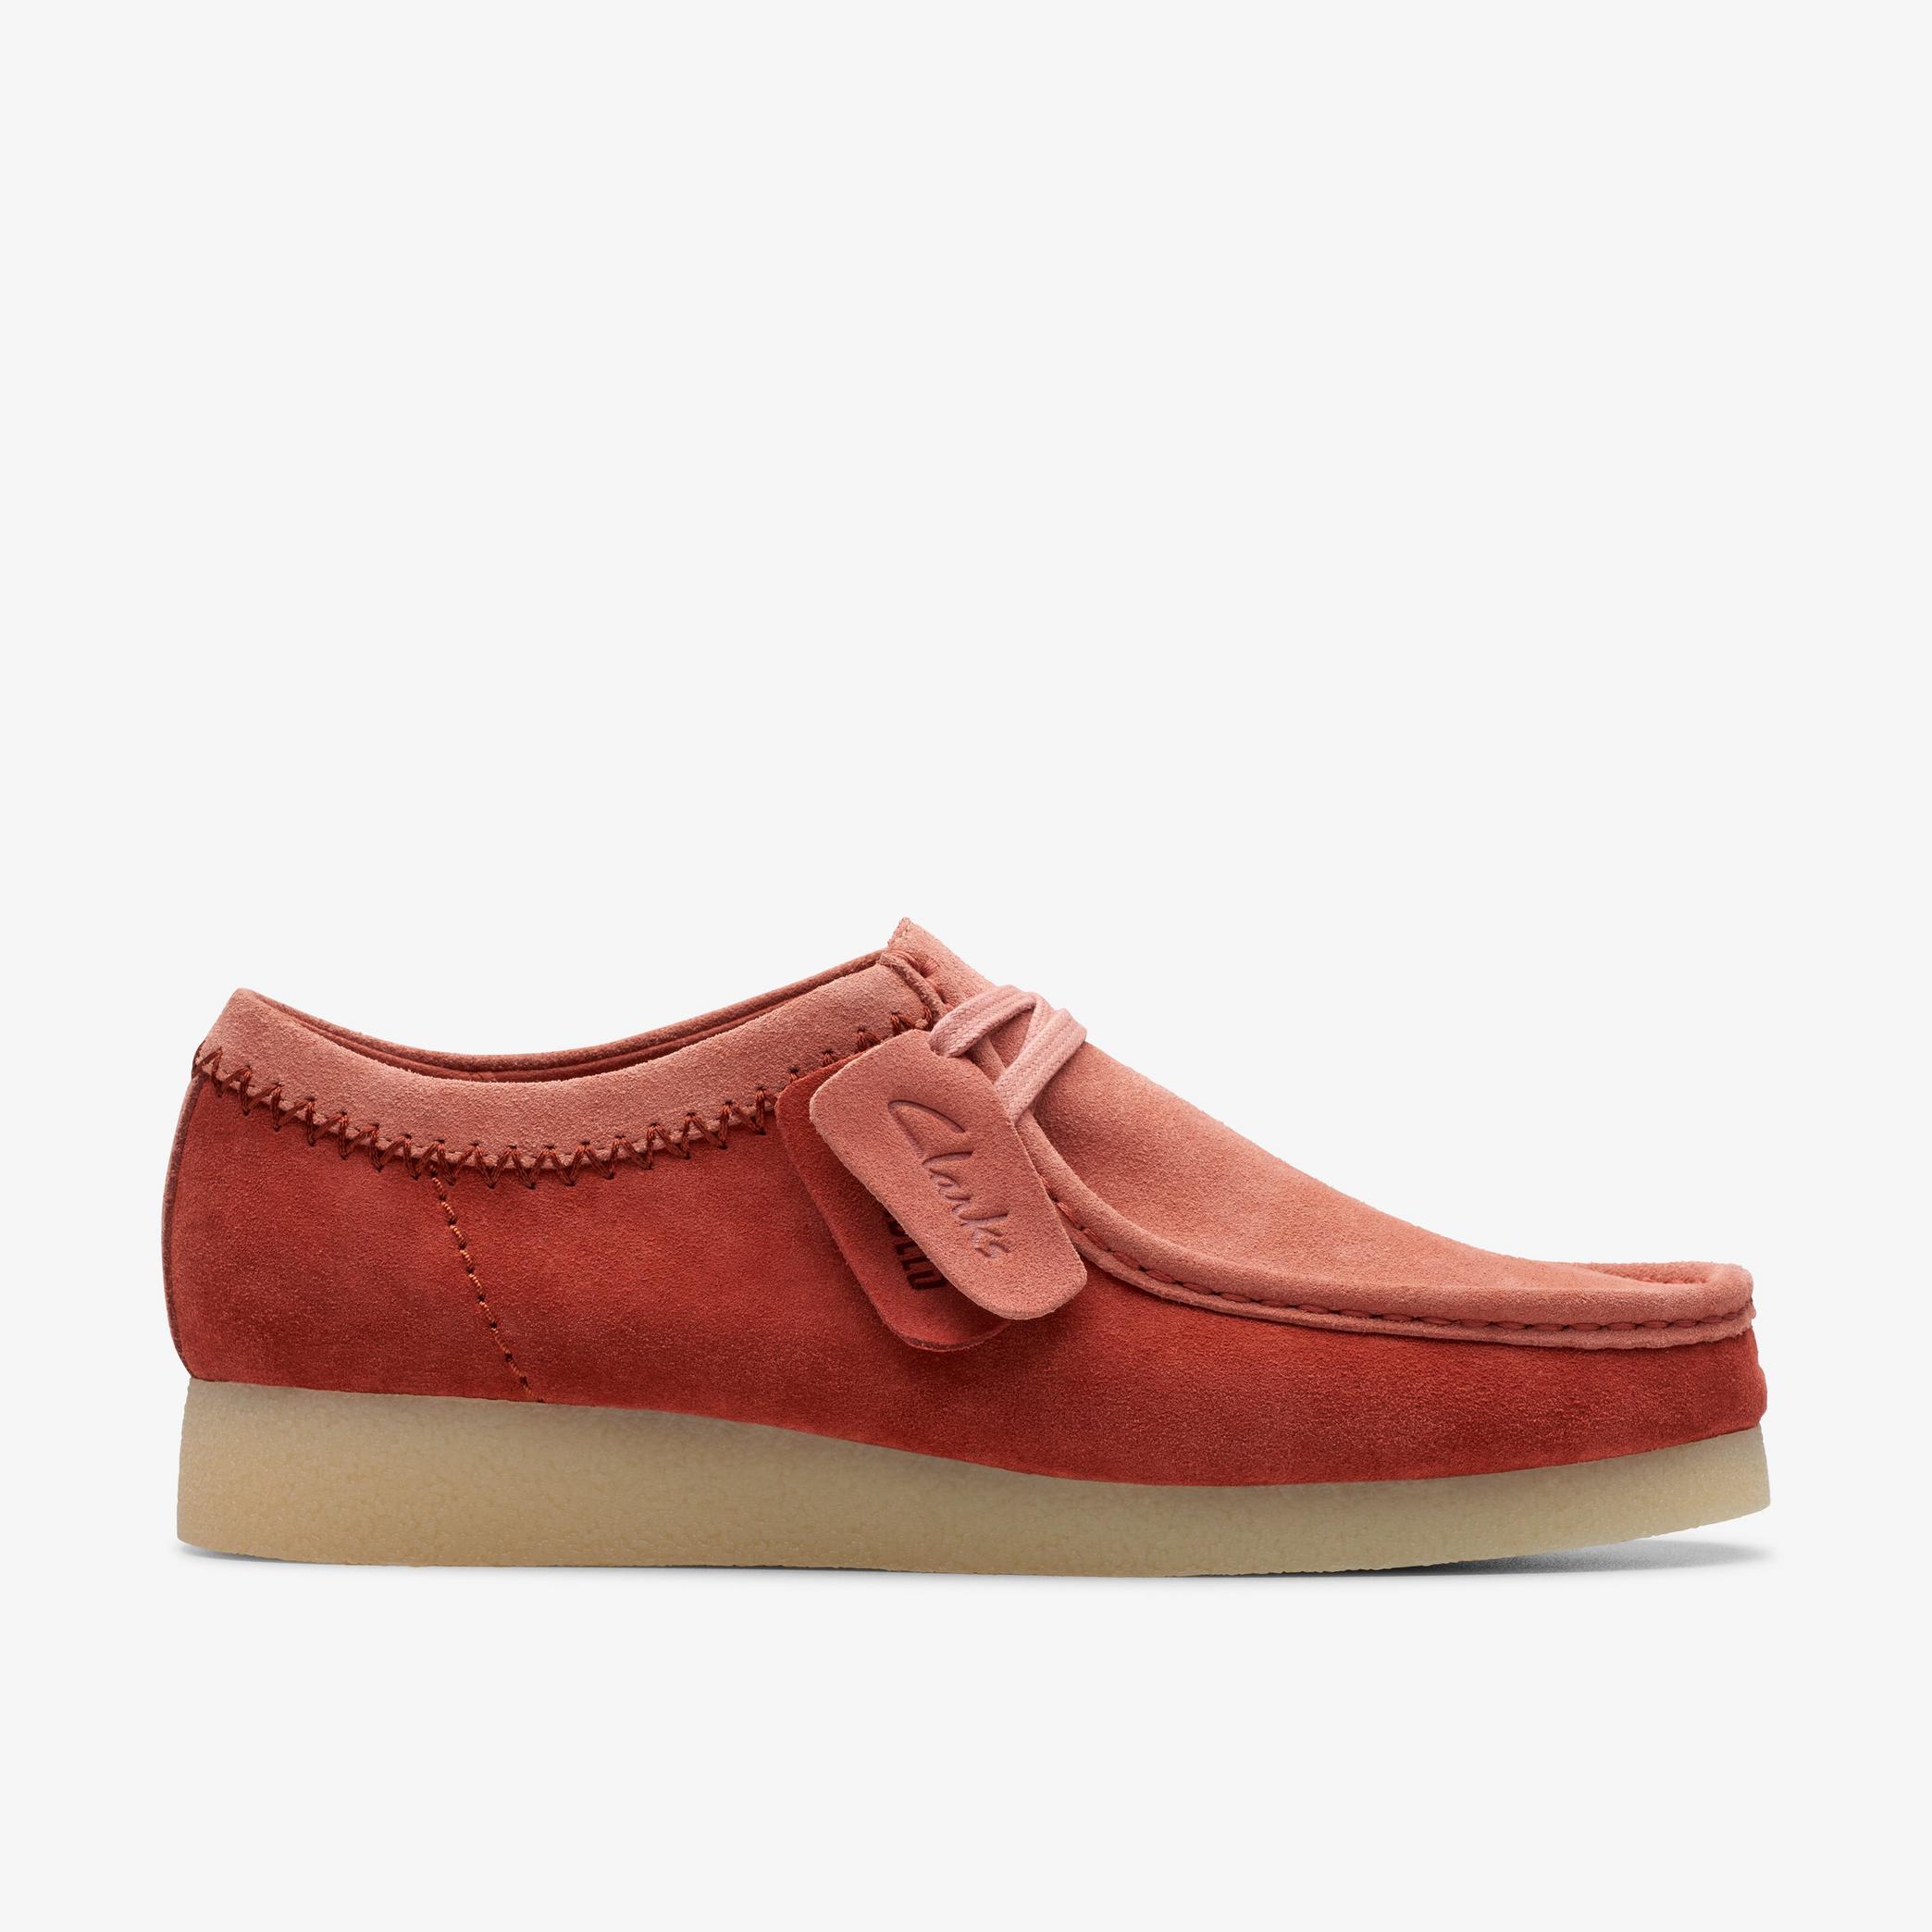 Wallabee EVO Terracotta Suede Moccasins, view 1 of 6